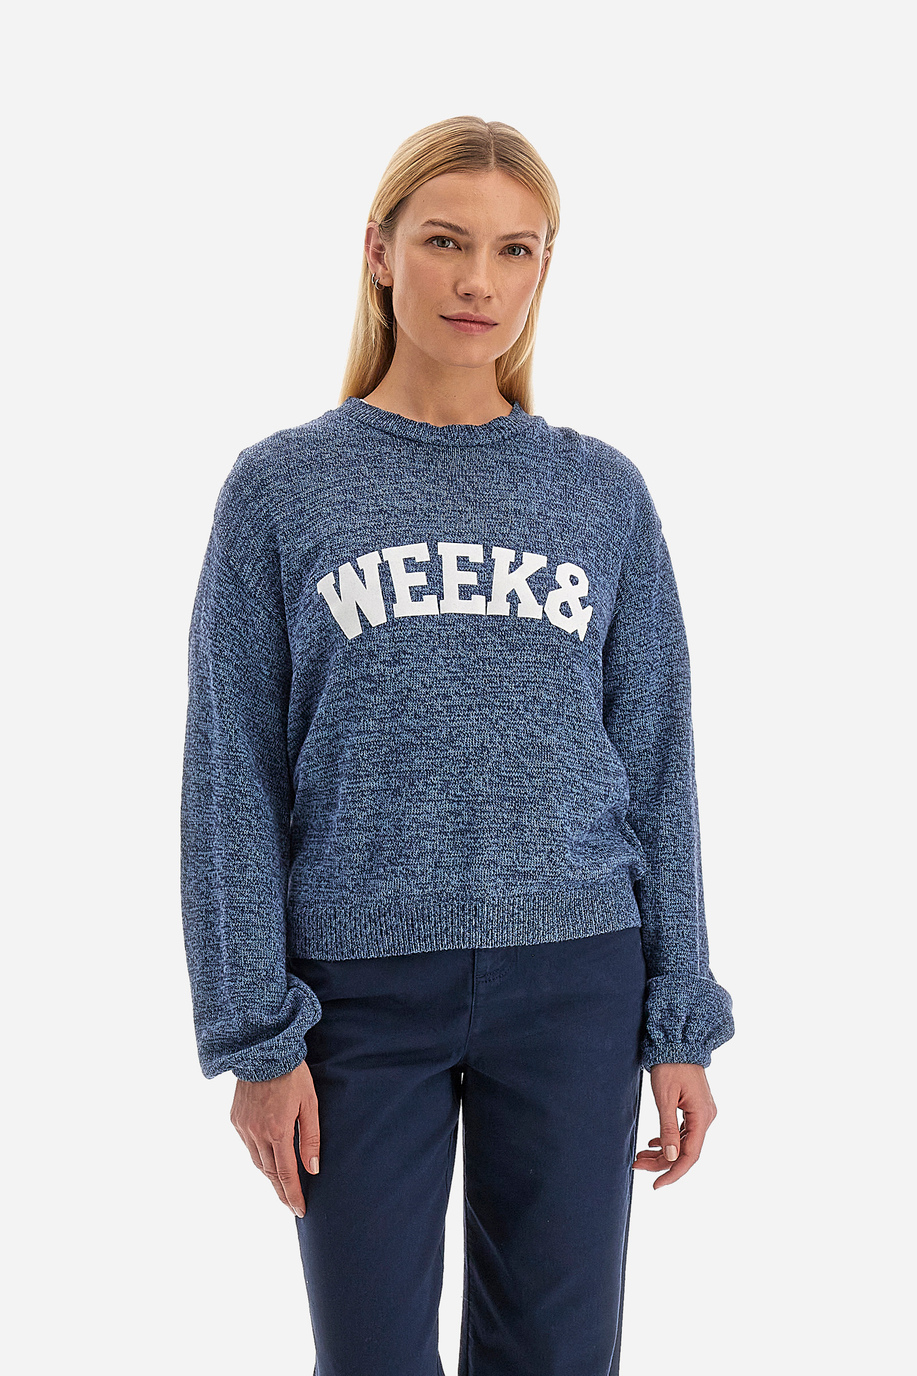 Women's round-neck long-sleeved sweater with Spring Weekend logo - Videl | La Martina - Official Online Shop